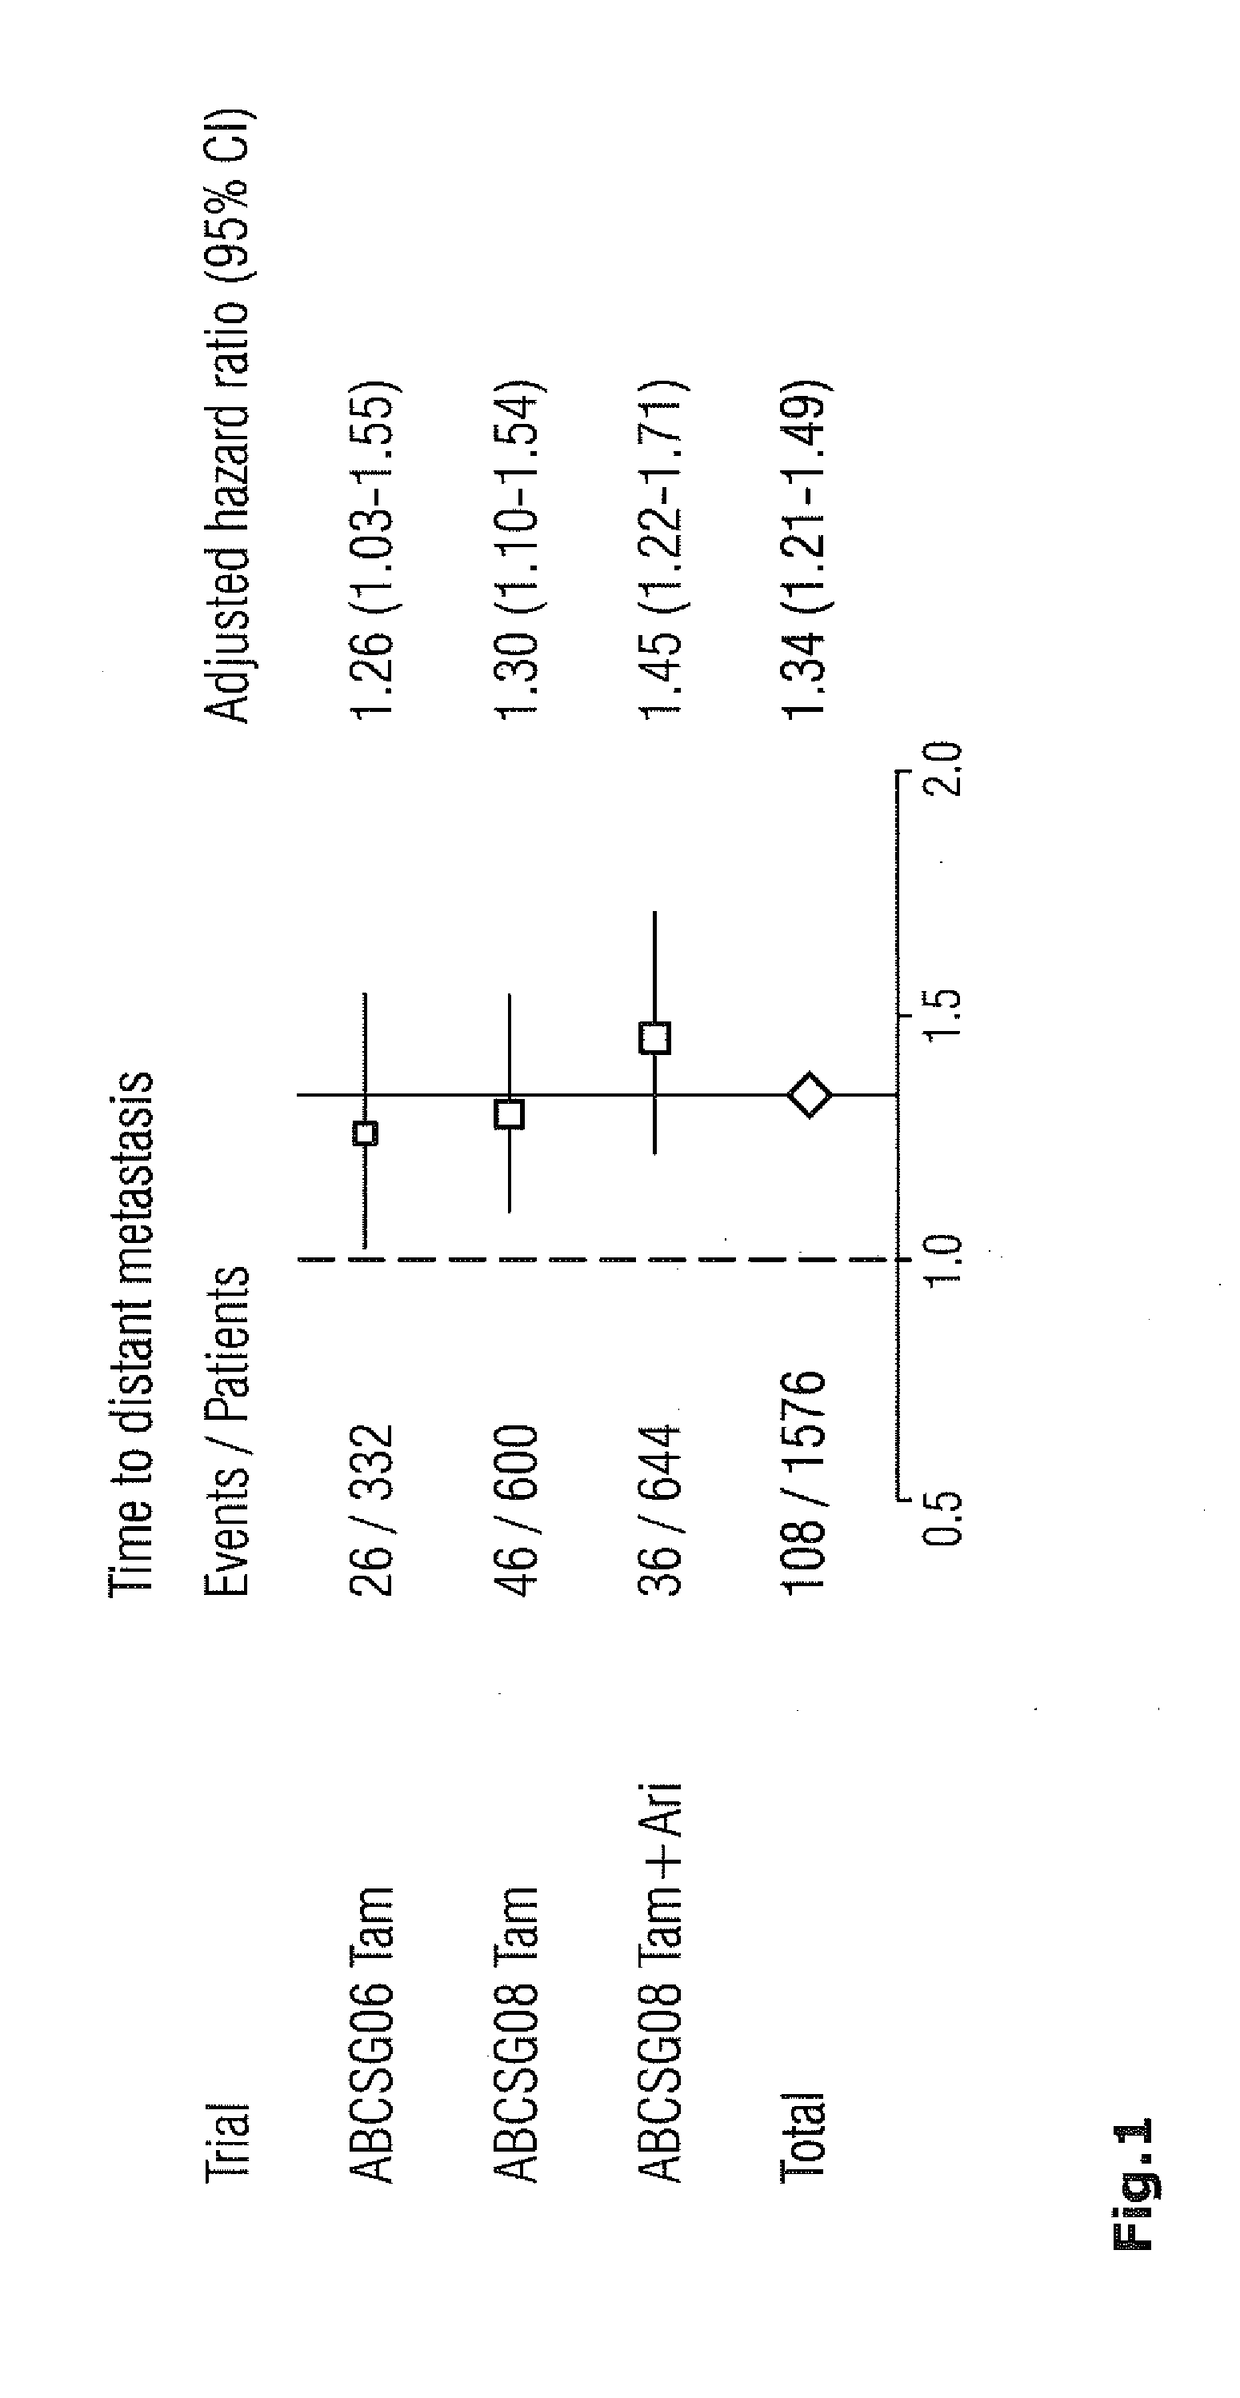 Method for breast cancer recurrence prediction under endocrine treatment